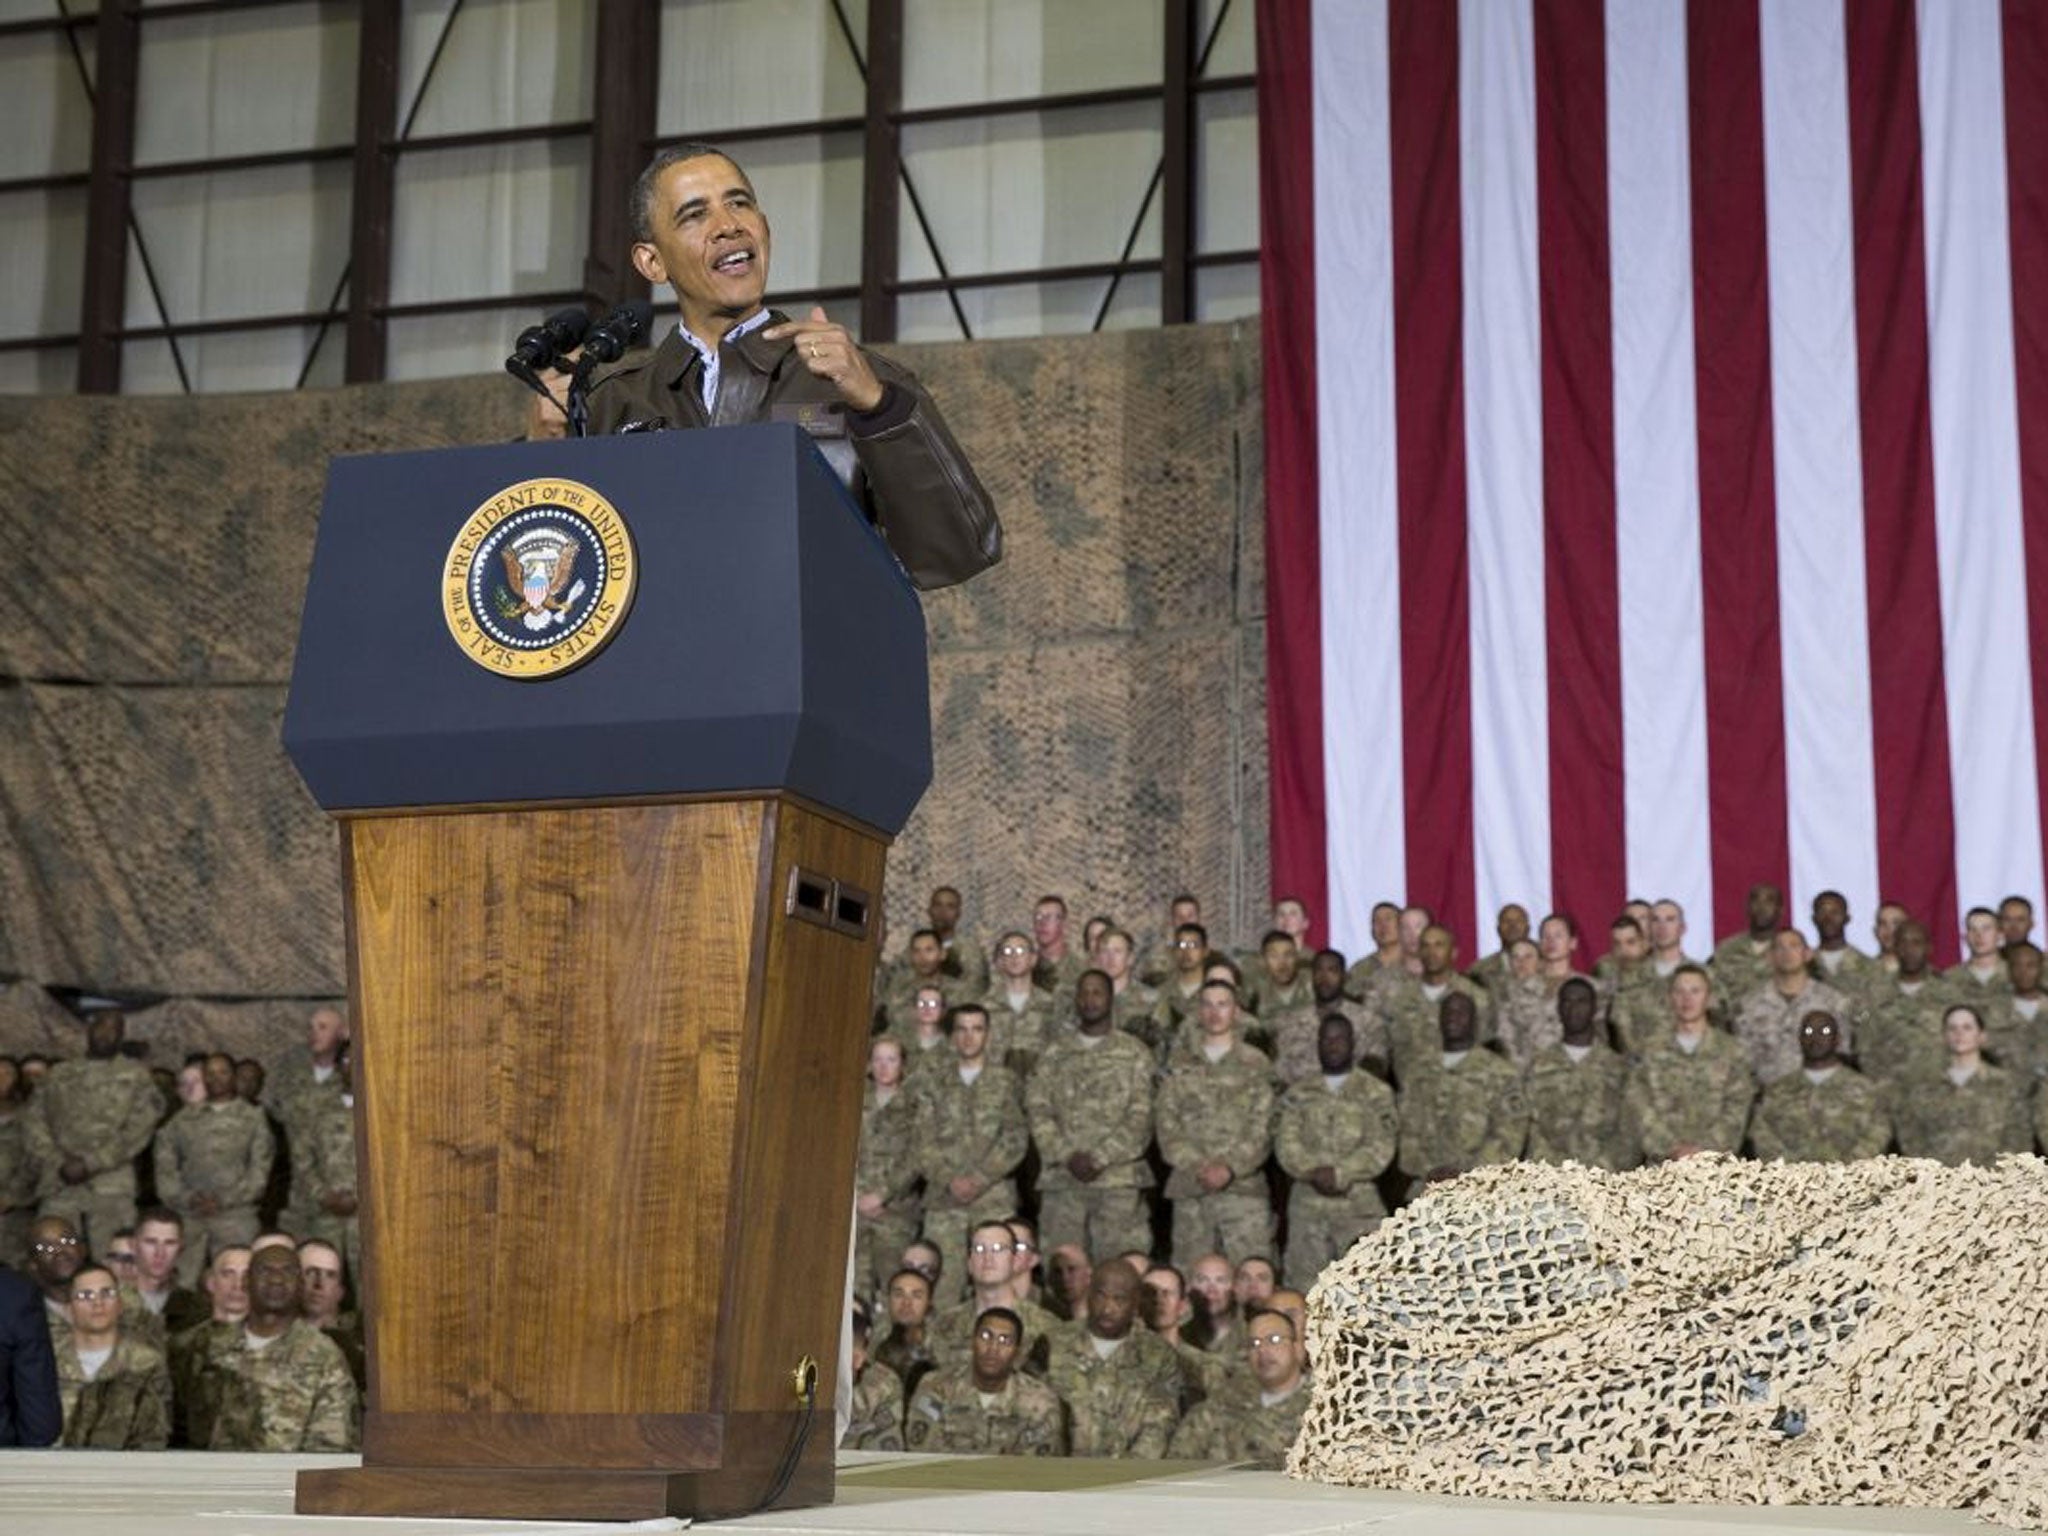 President Barack Obama speaking during a troop rally after arriving at Bagram Air Field for an unannounced visit, north of Kabul, Afghanistan.